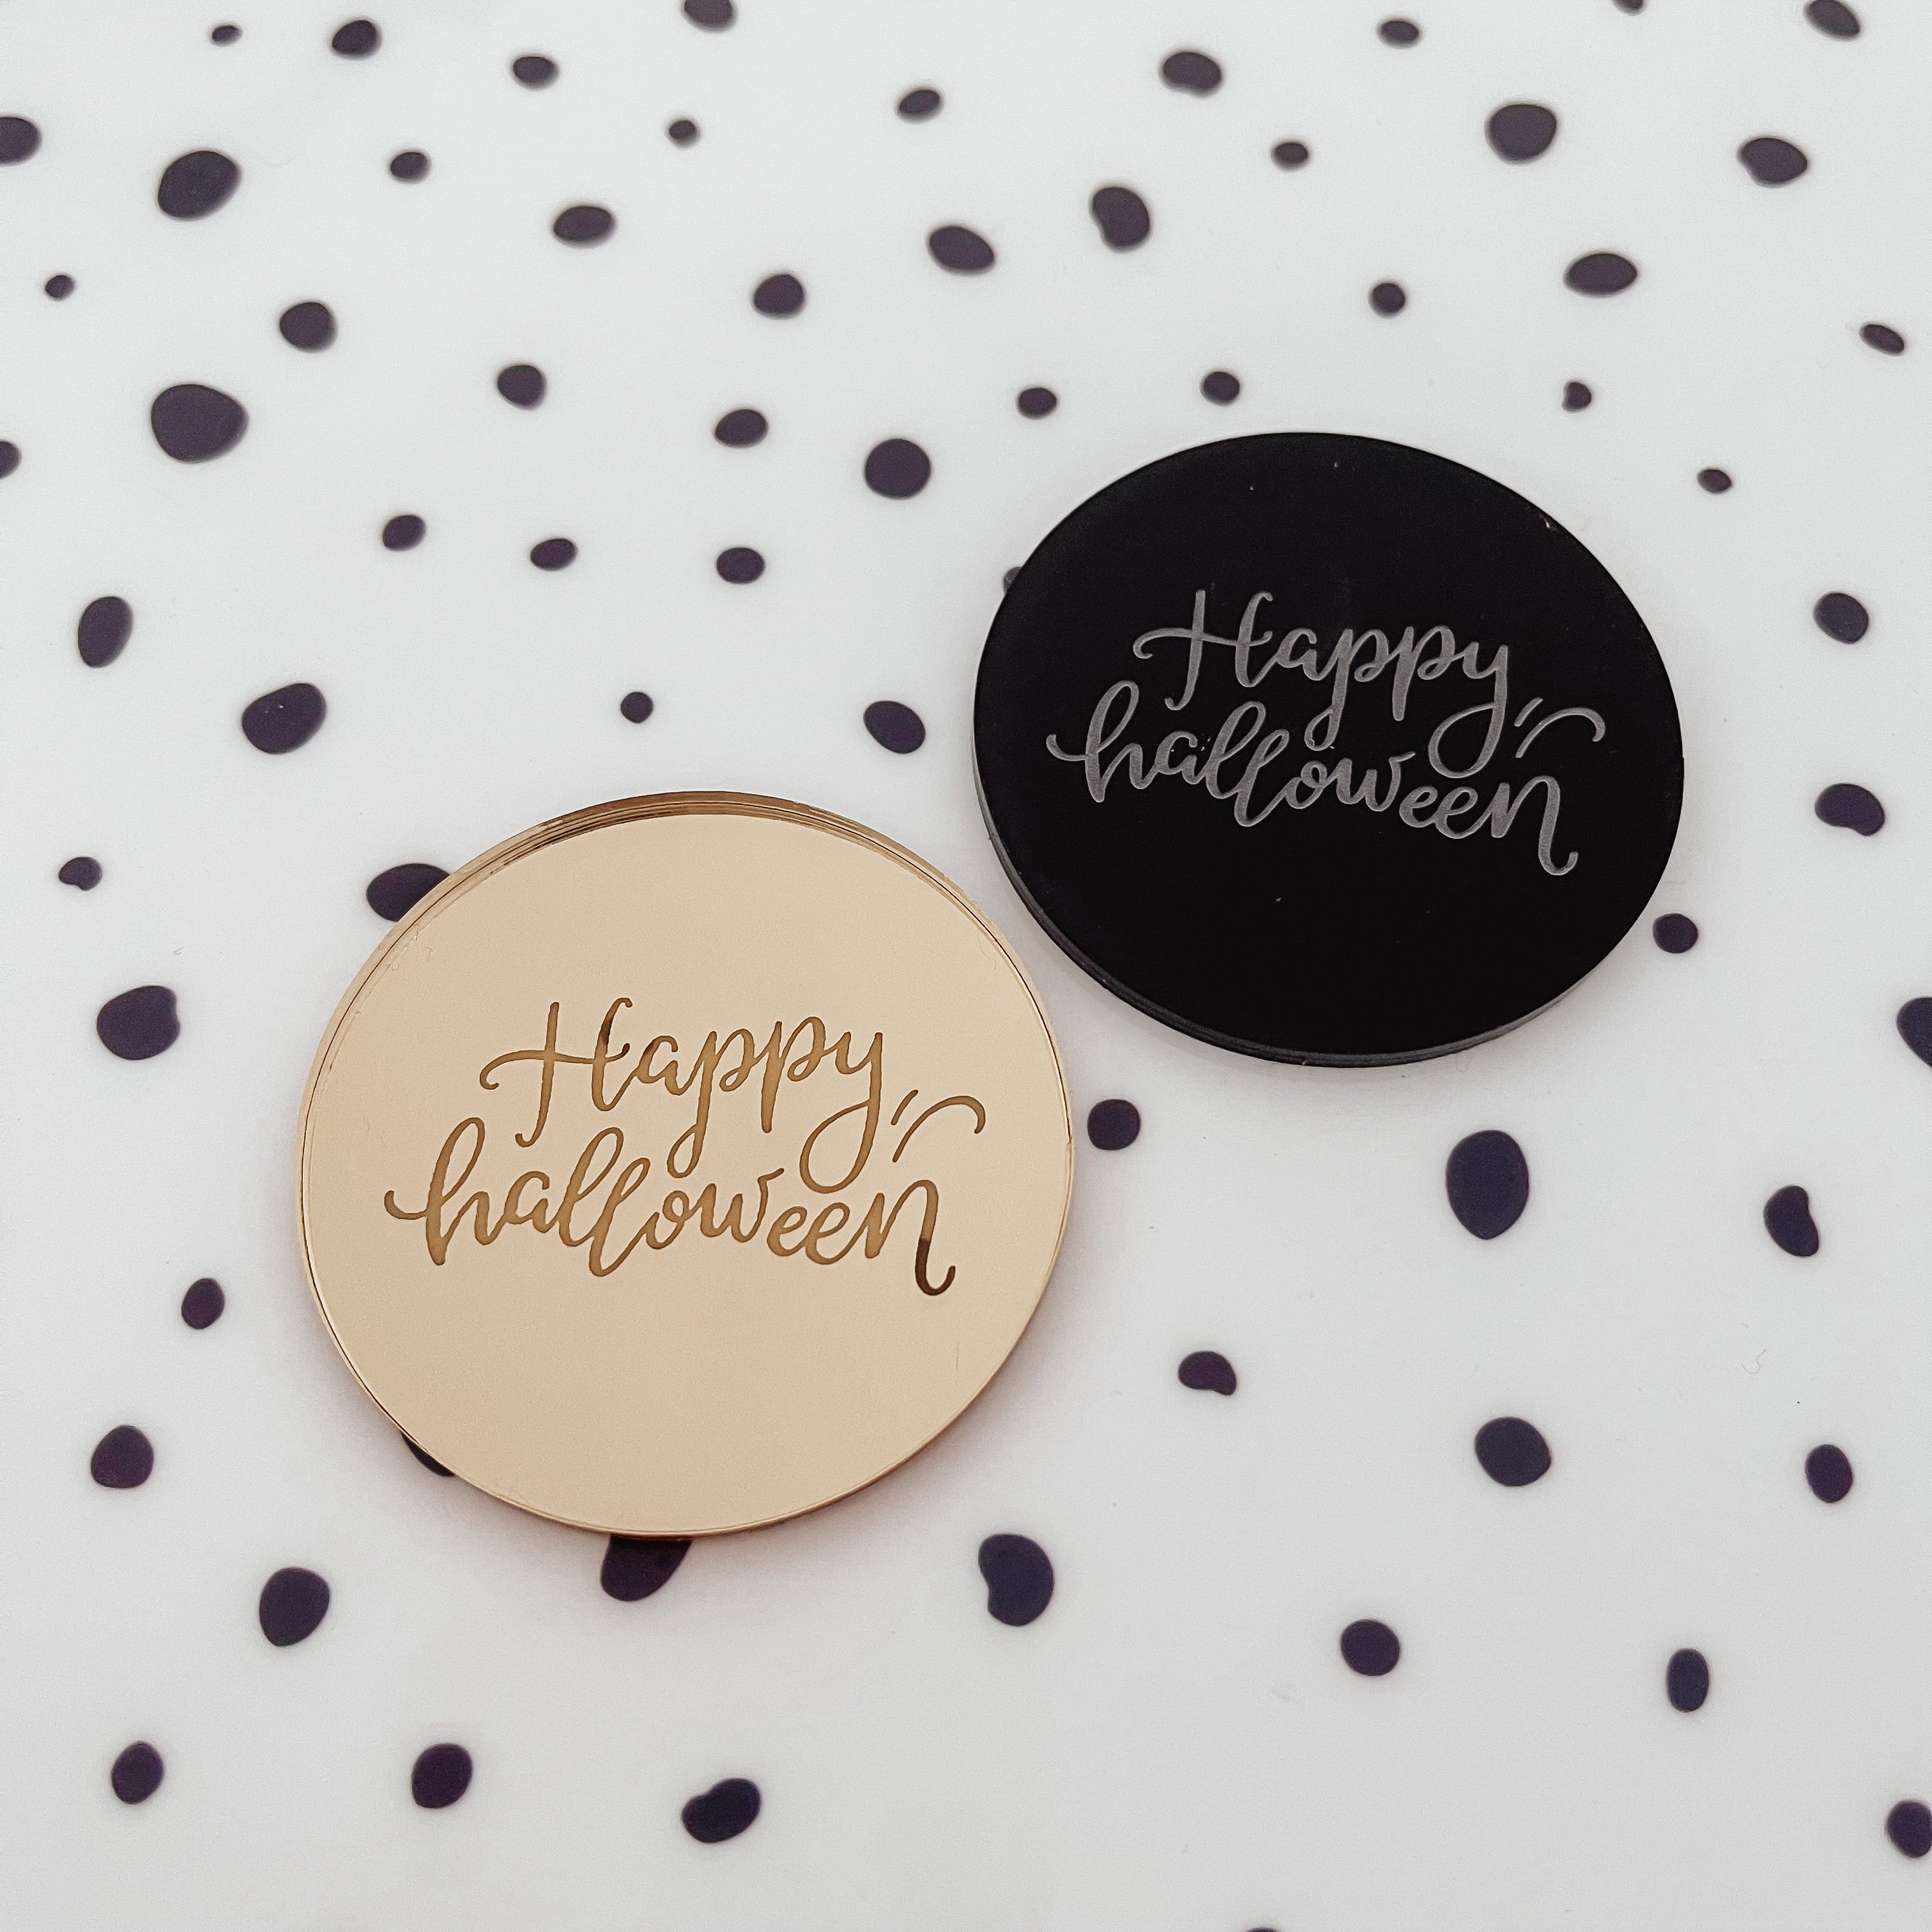 Happy Halloween Cupcake Toppers